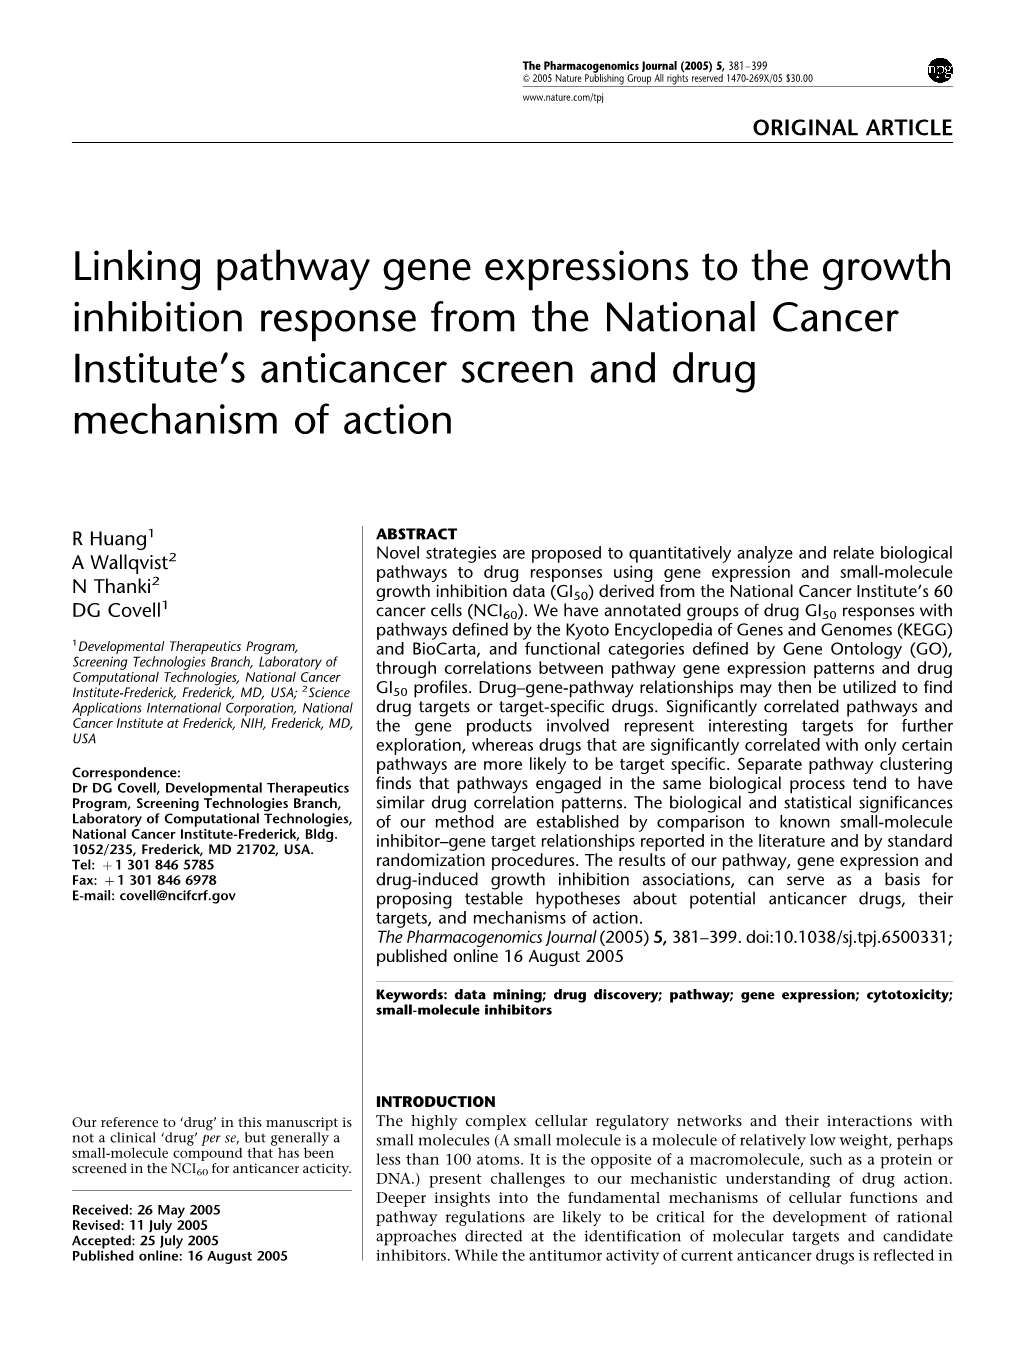 Linking Pathway Gene Expressions to the Growth Inhibition Response from the National Cancer Institute’S Anticancer Screen and Drug Mechanism of Action